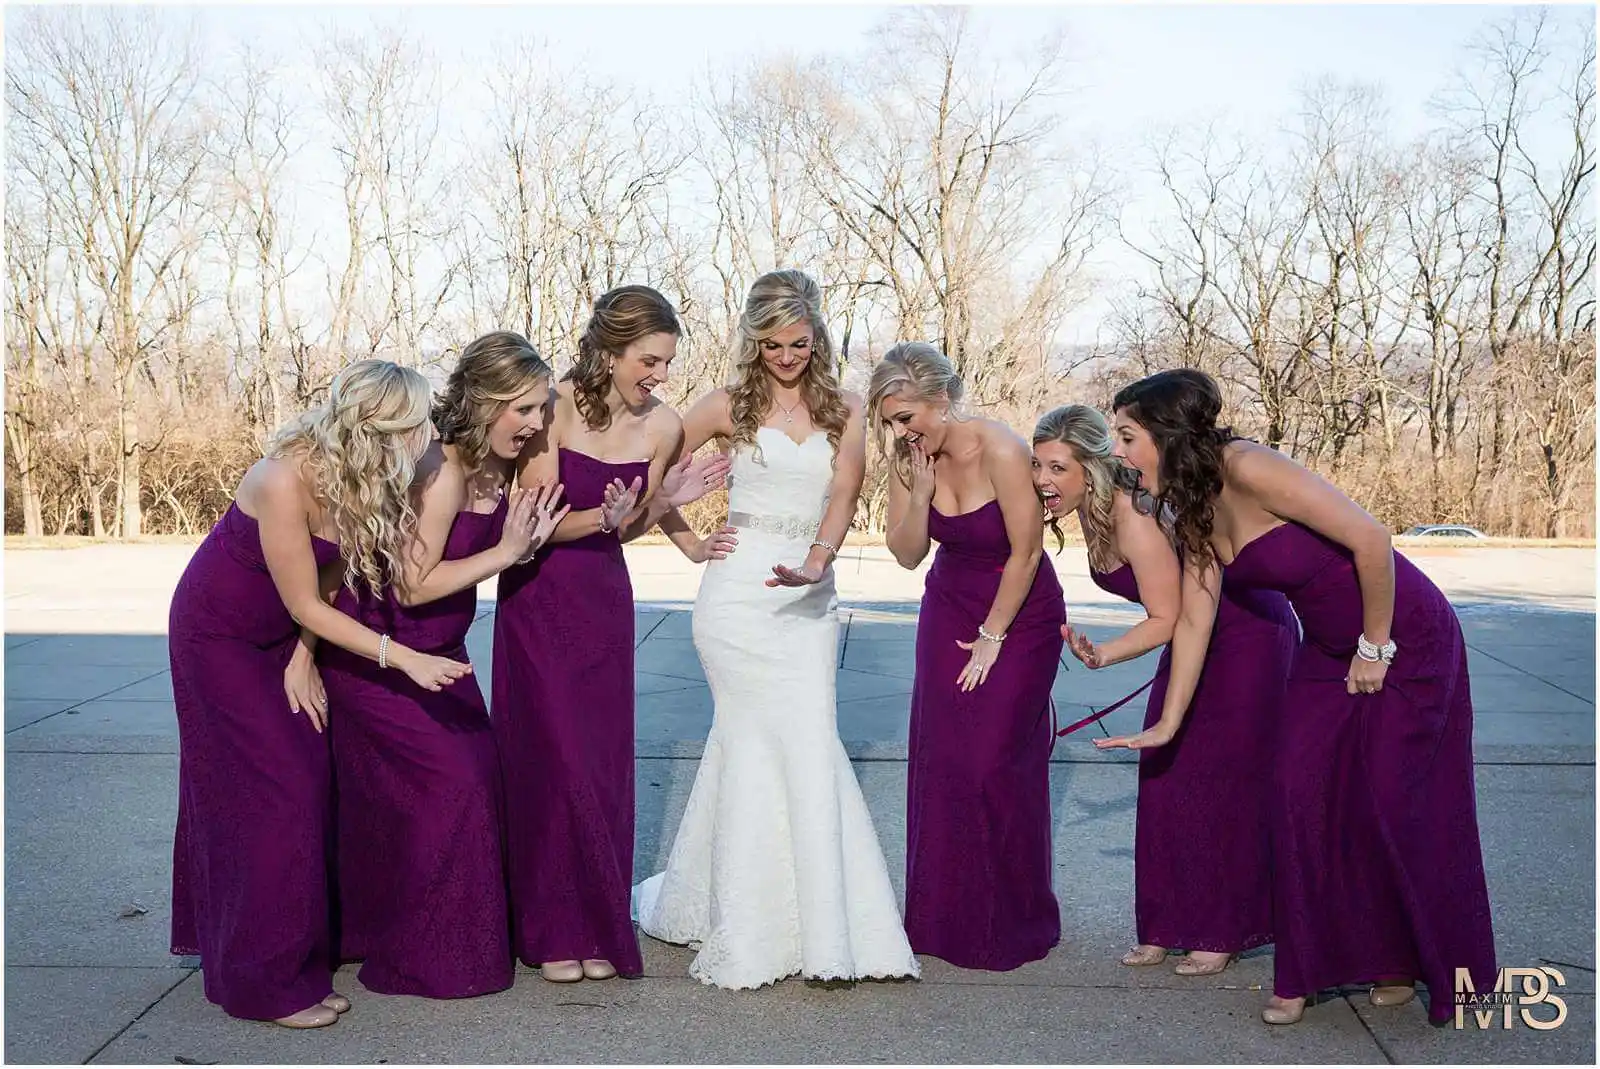 Bride and bridesmaids in purple gowns admiring wedding dress.